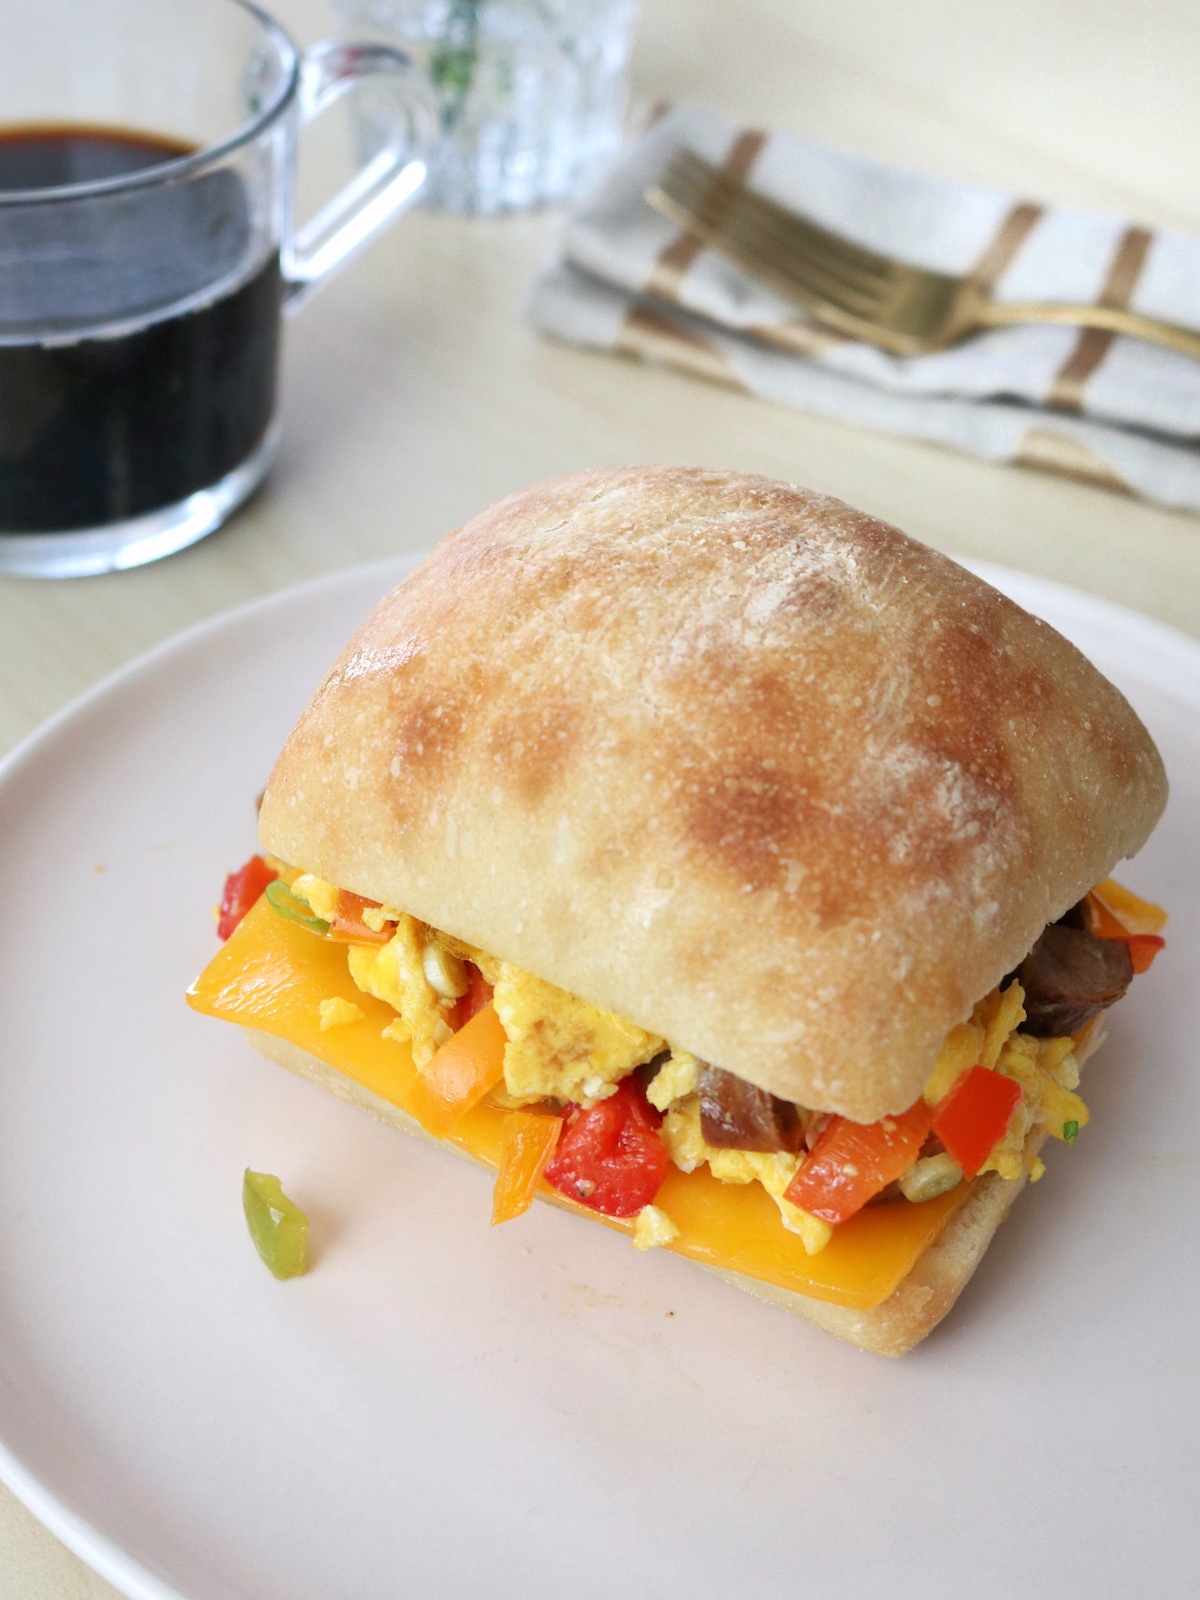 Egg, Sausage, and Cheese Breakfast Sandwich - The Local Palate